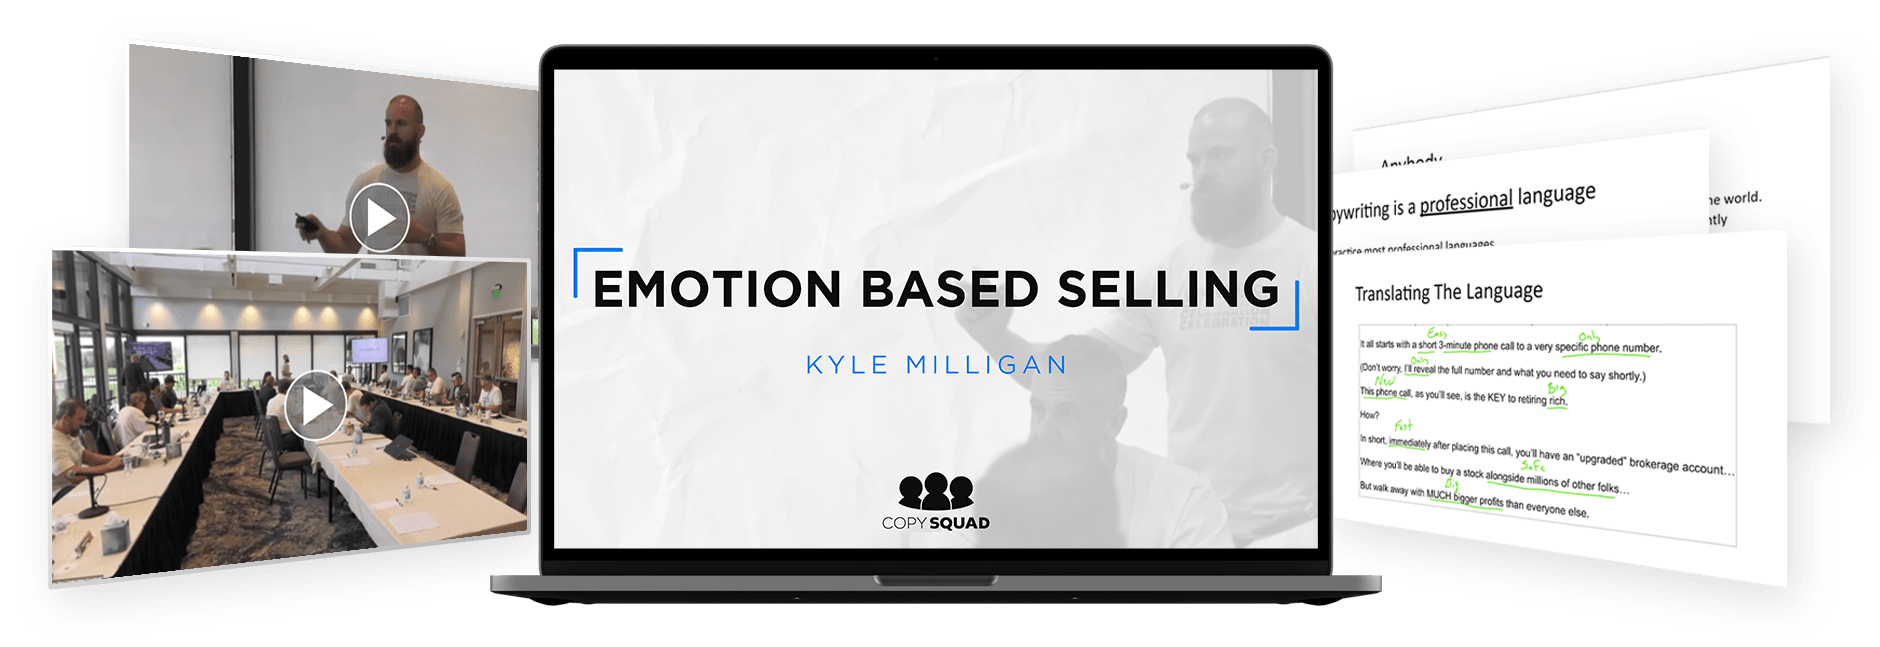 From Copywriter To Closer By Kyle Milligan - Free Download Live Masterclass Course Copy Squad + Emotion Based Selling OTO